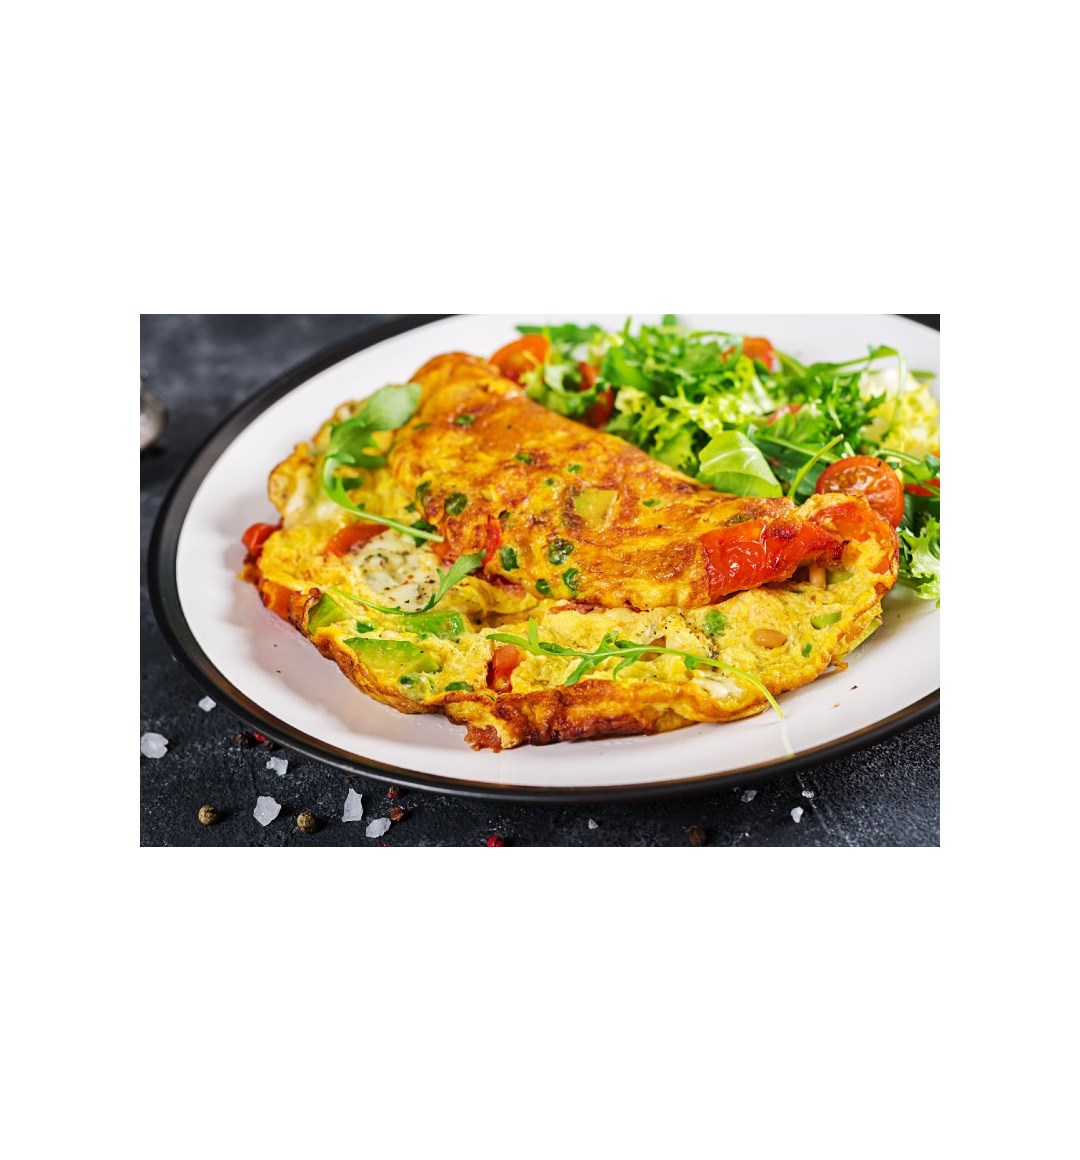 breakfast-omelette-with-tomatoes-avocado-blue-chee-5VEU4S3